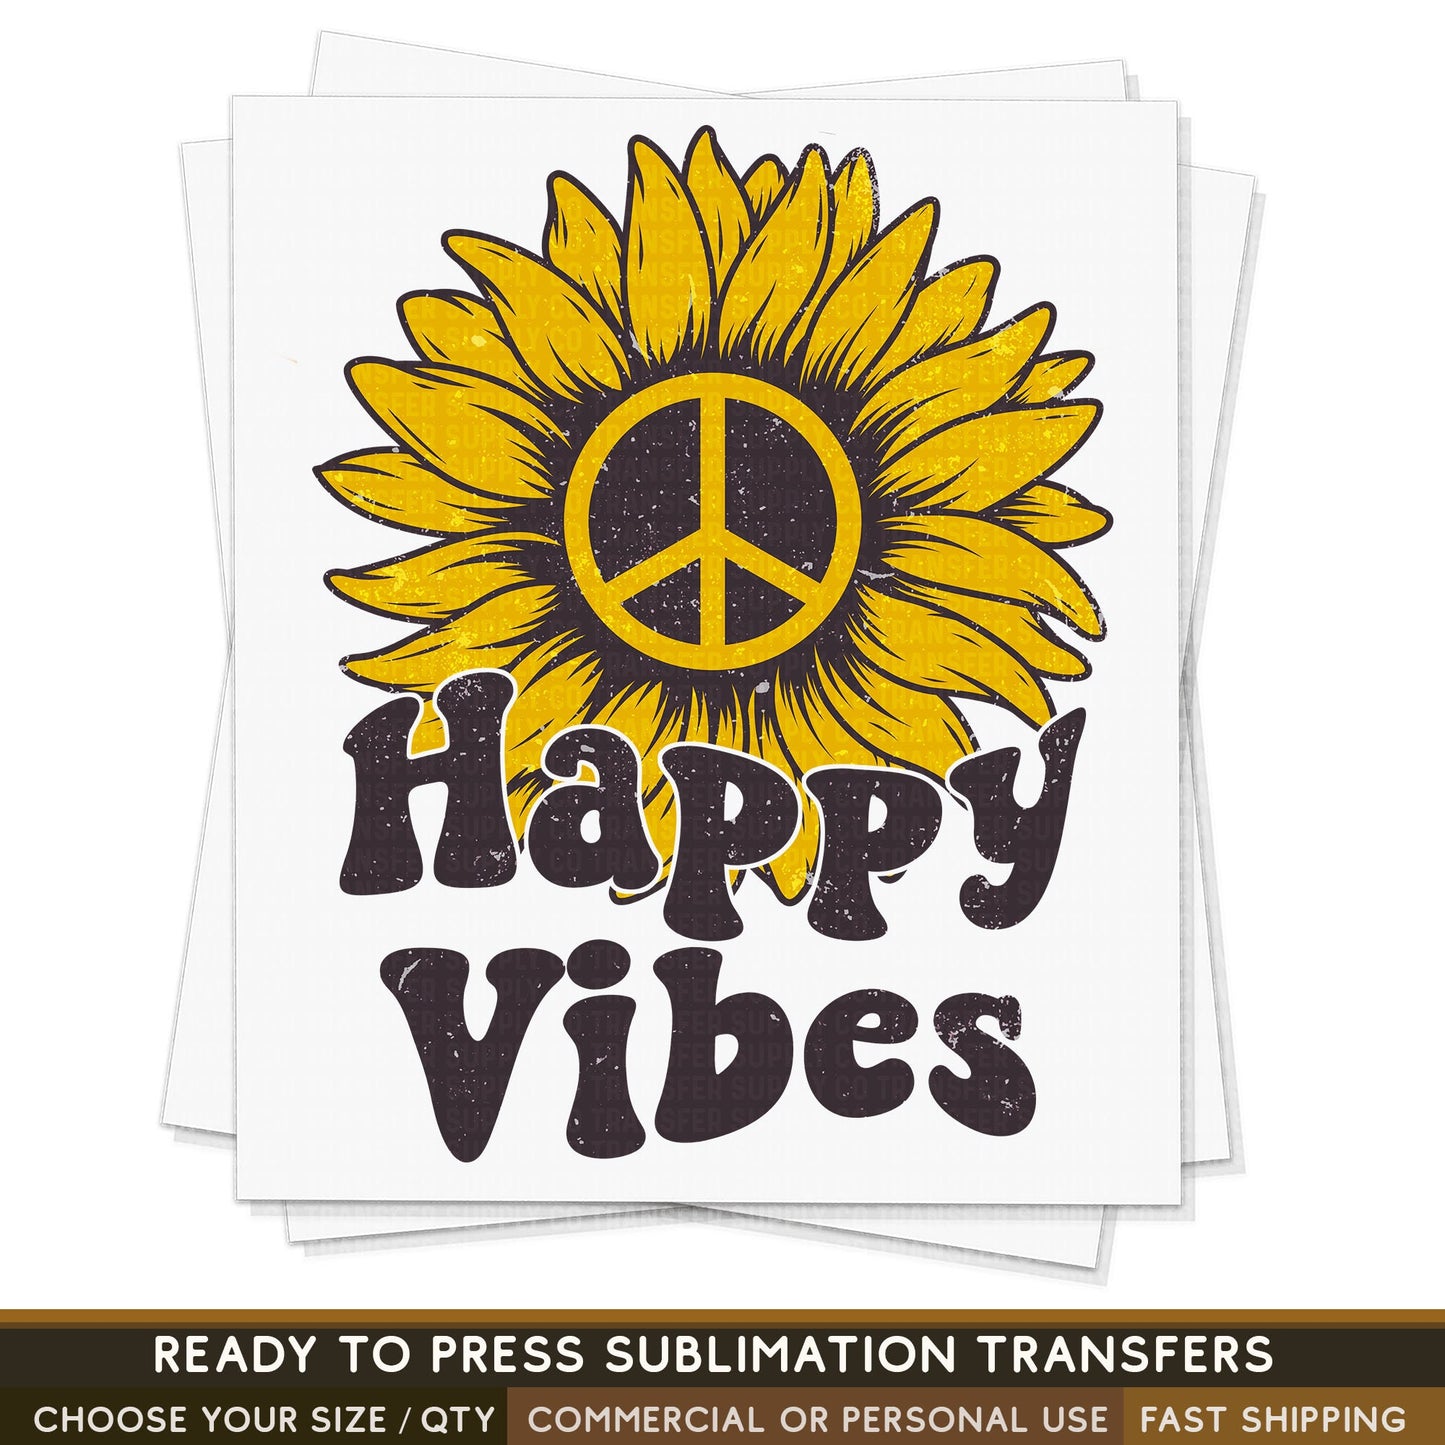 Happy Vibes Sunflower, Ready To Press Sublimation Transfers, Ready To Press Transfers,Sublimation Prints, Sublimation Transfers